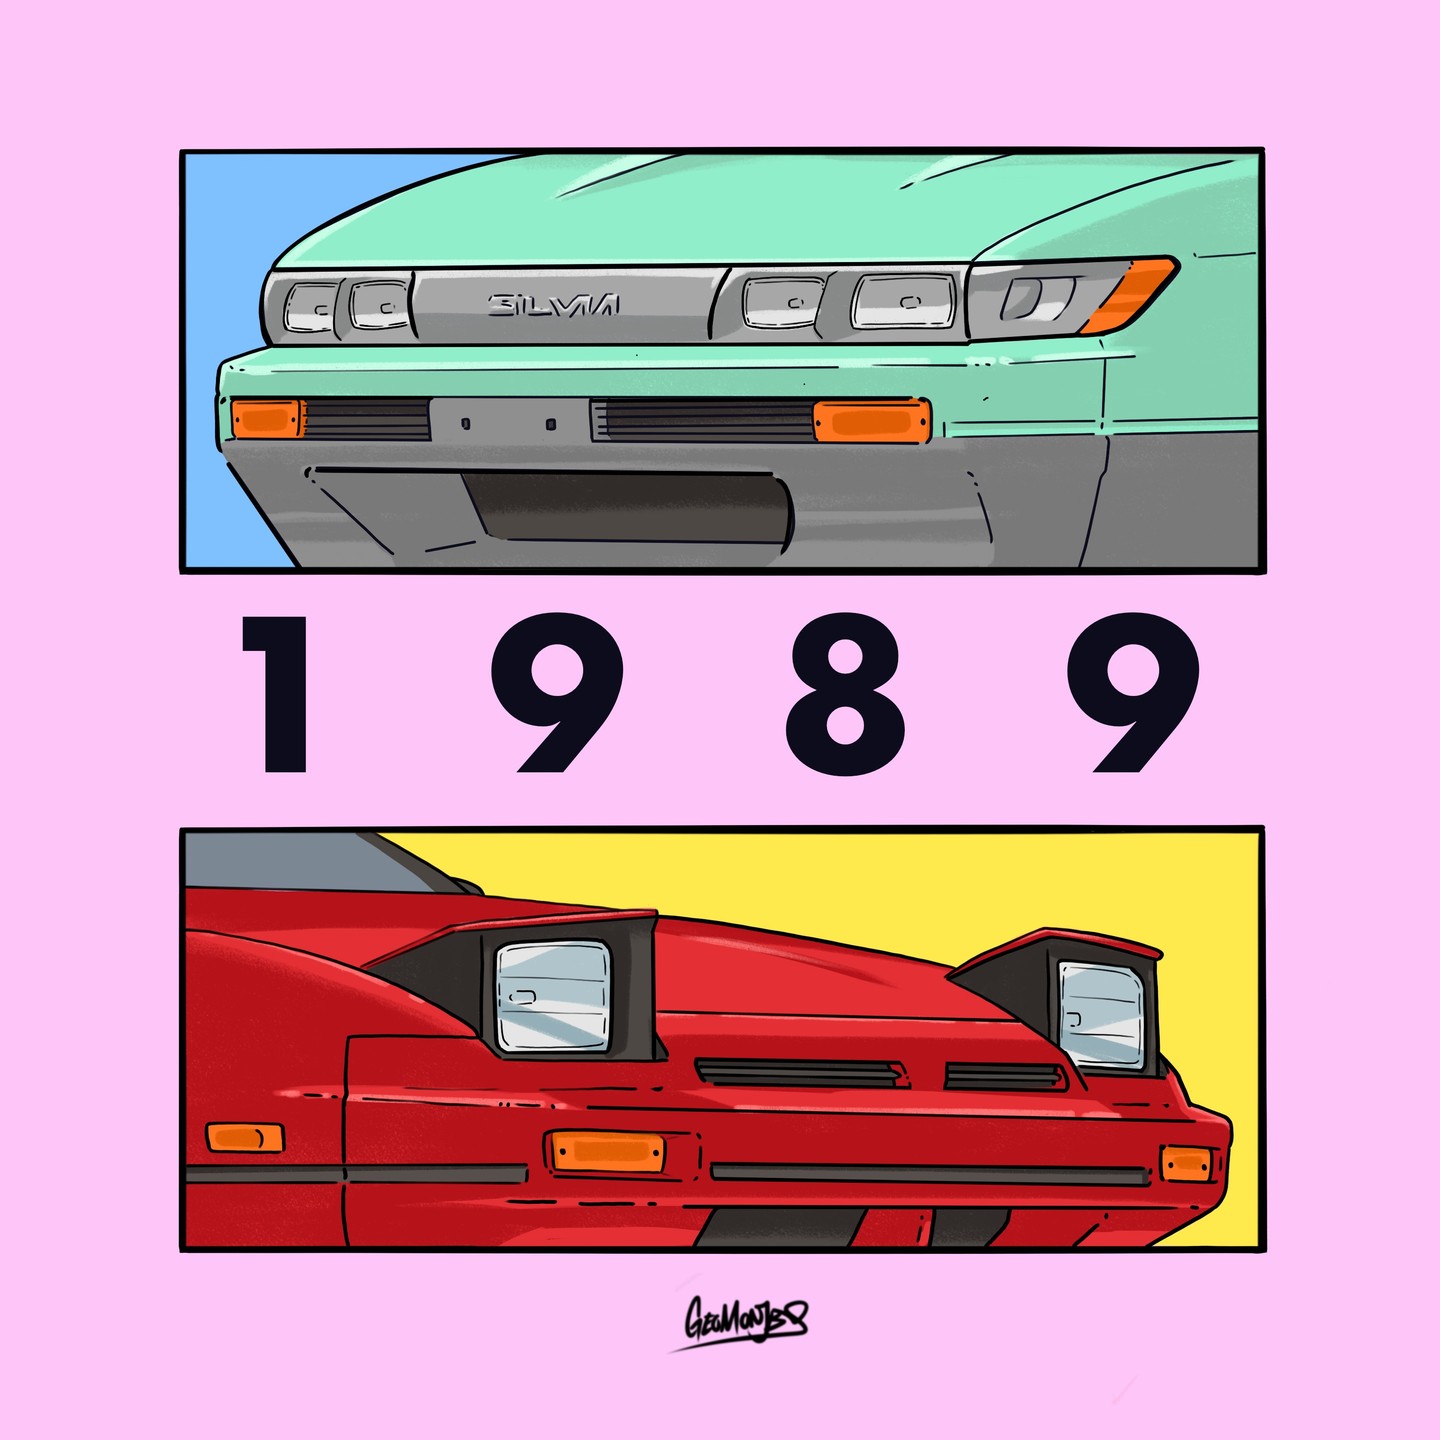 1989 was an interesting year, especially when these two S-Chassis came out.

Shirts available on my online store!
http:/